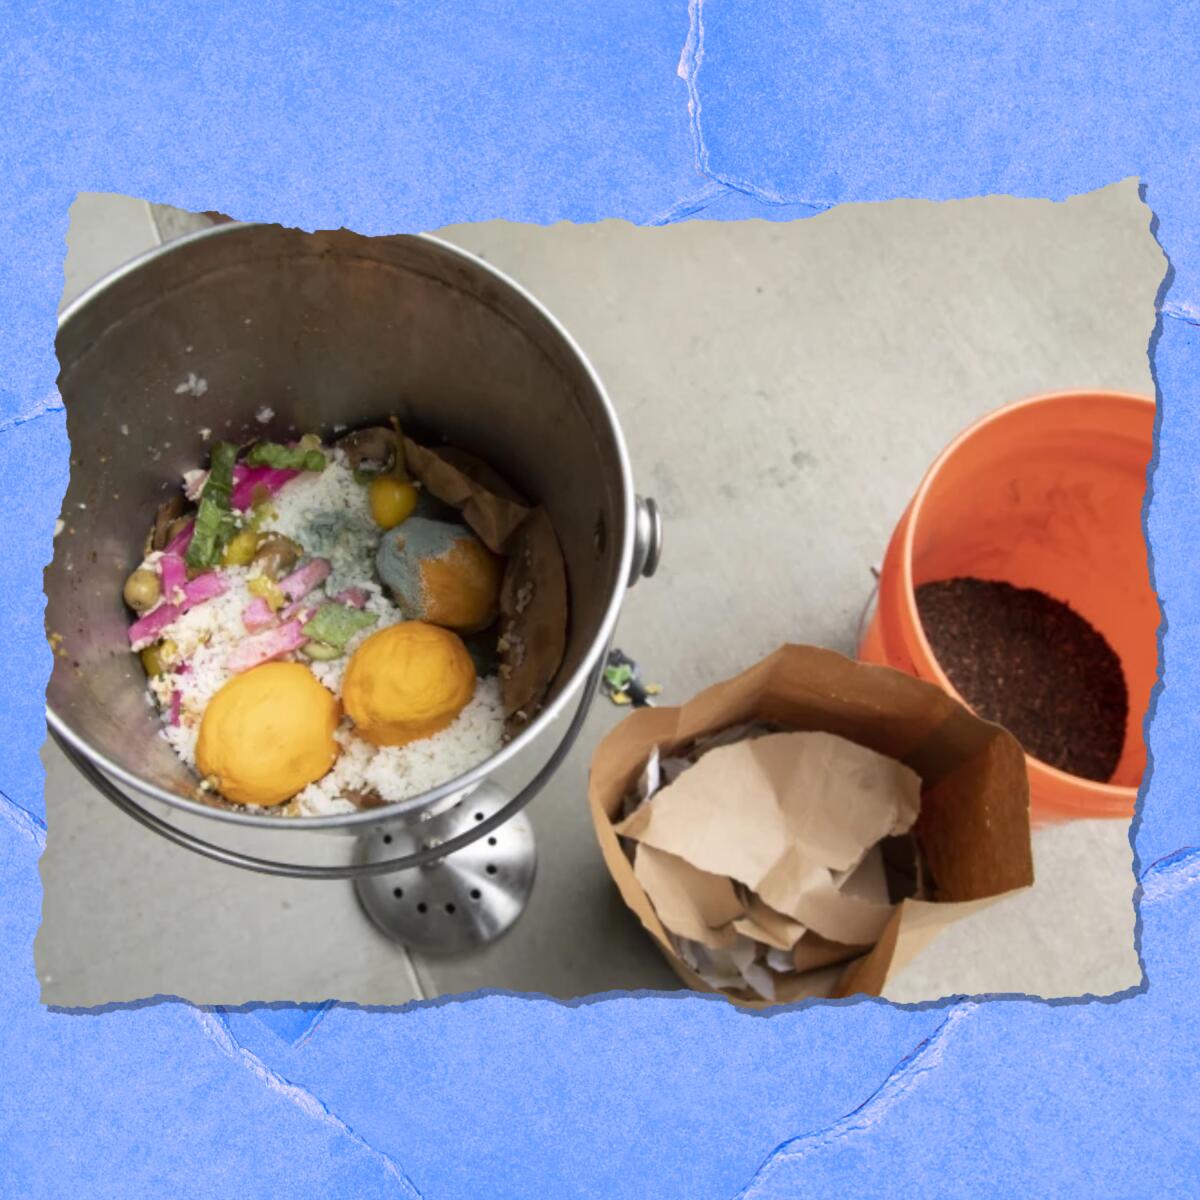 Containers hold food scraps including white rice and lemons, shredded paper and coffee grounds.